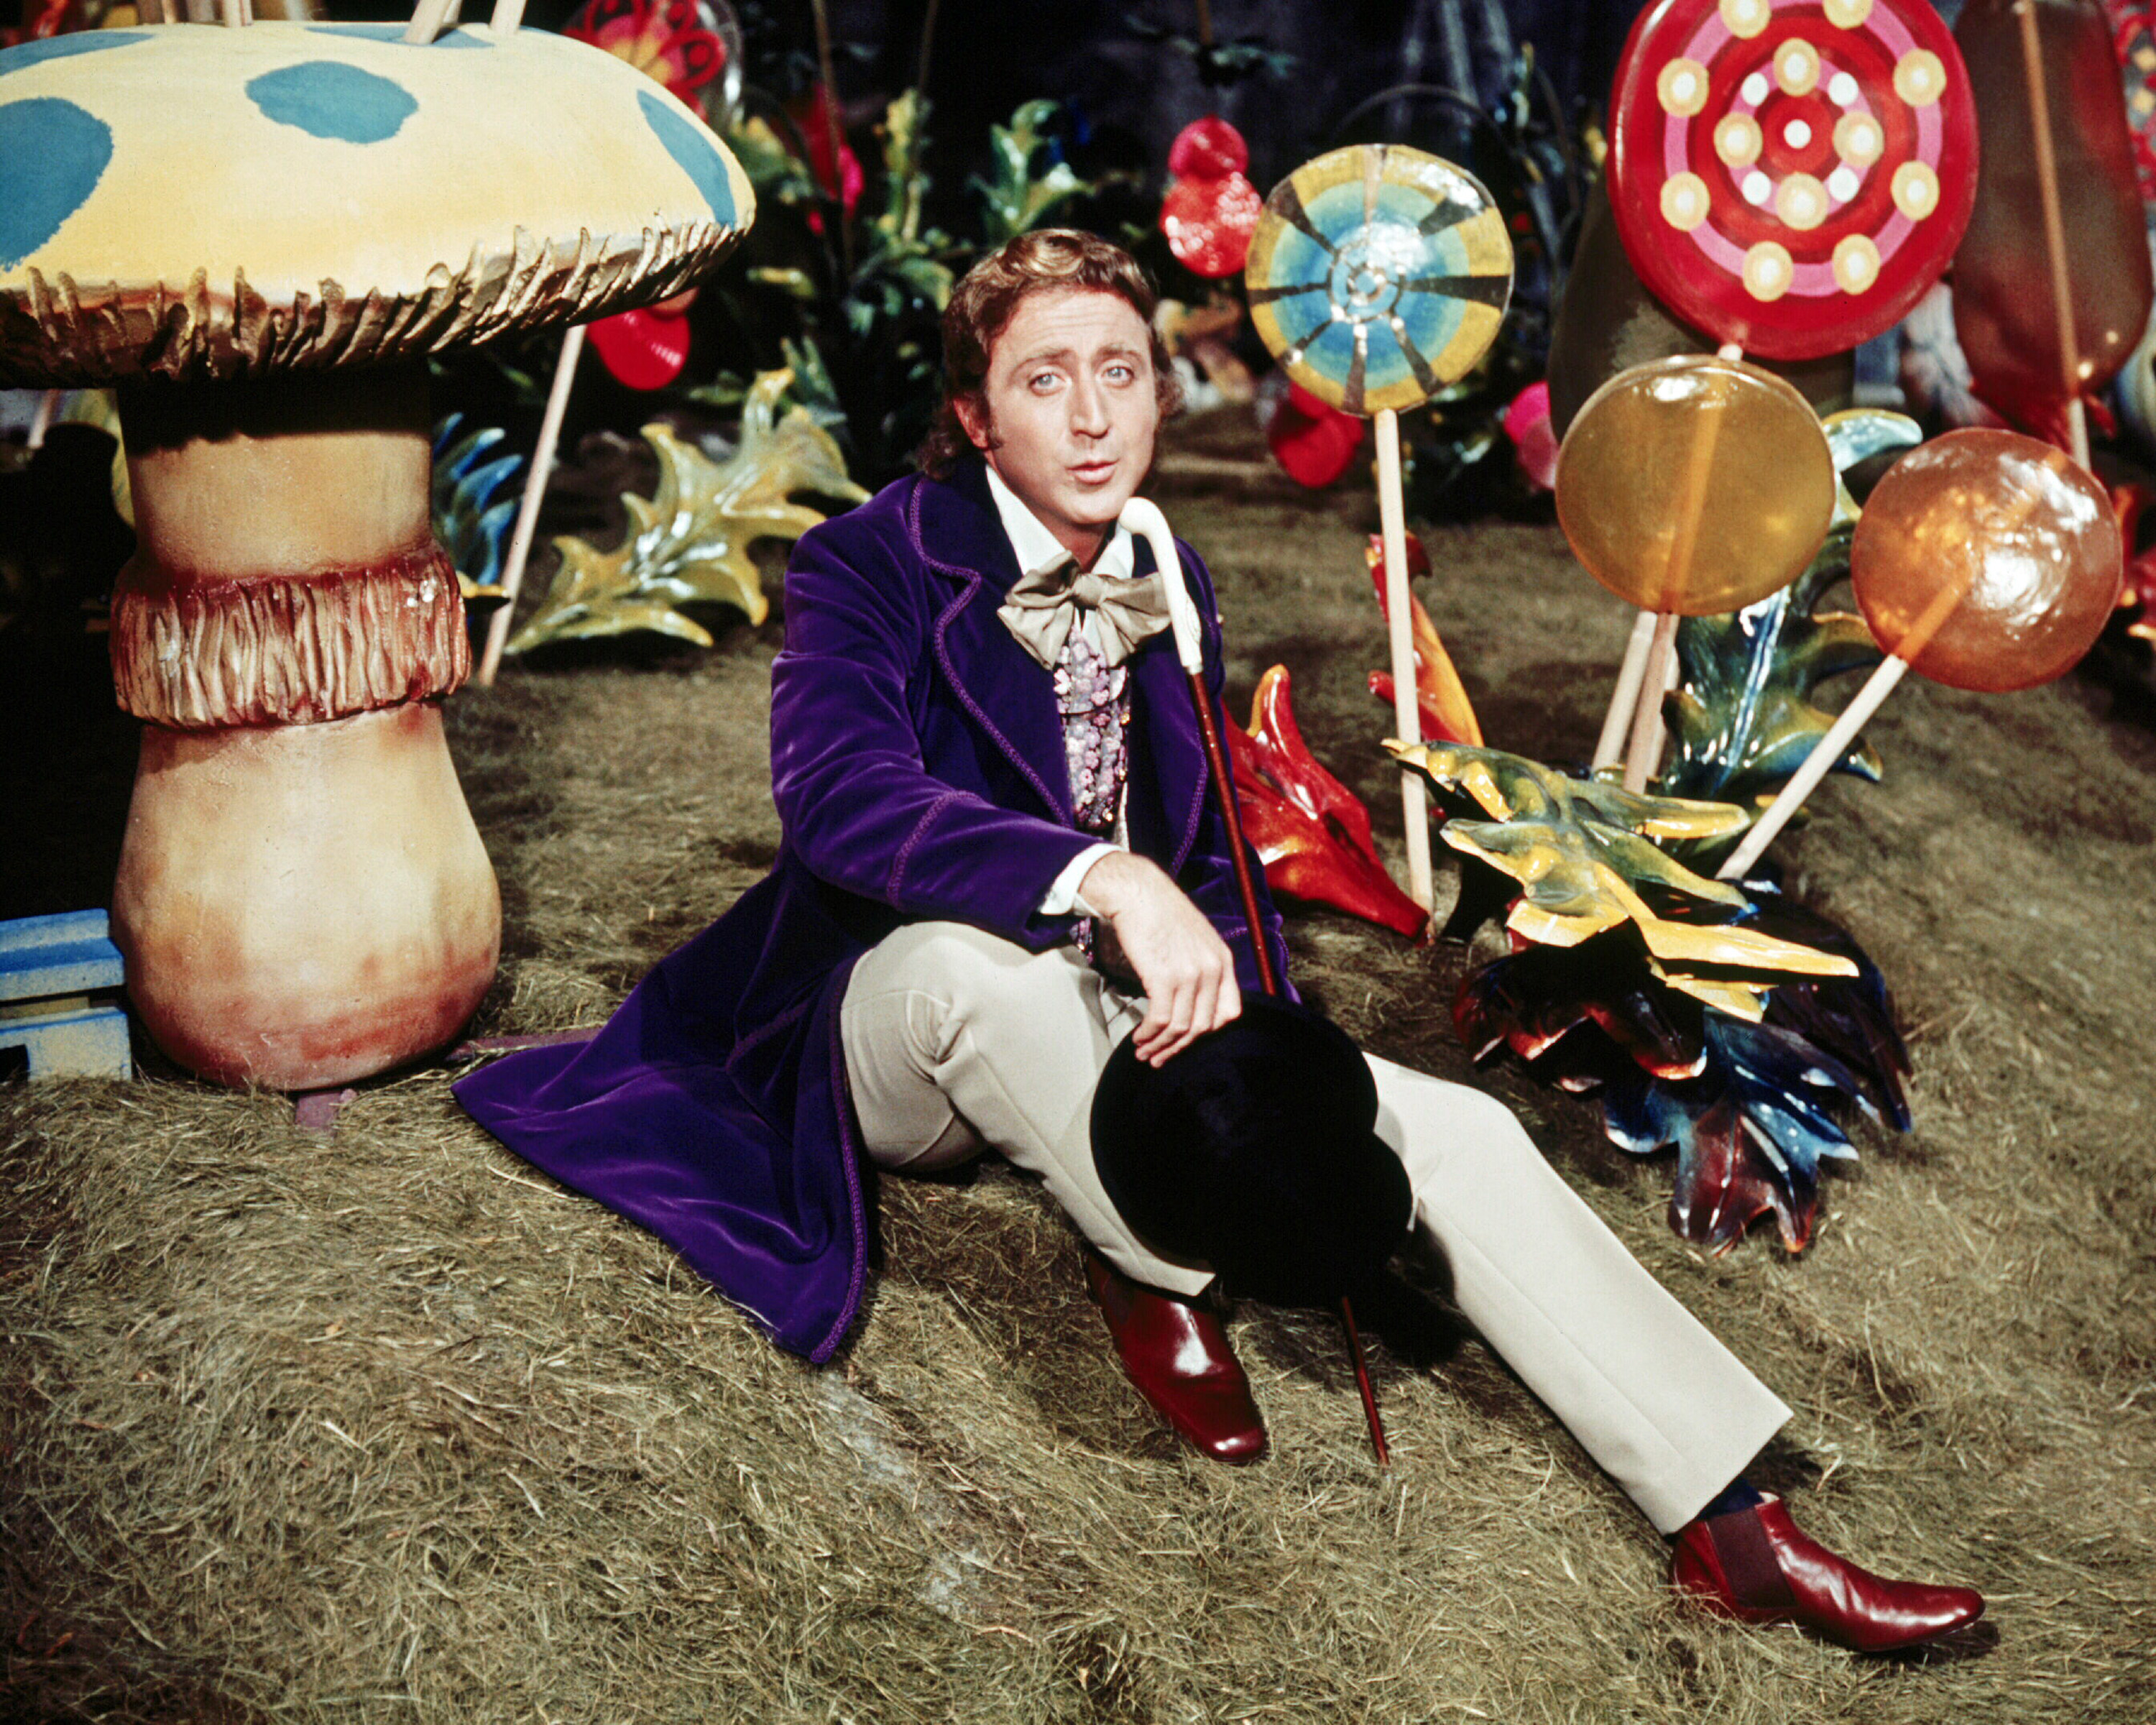 Gene Wilder sings in a scene from Willie Wonka and the Chocolate Factory, surrounded by life-size candy.